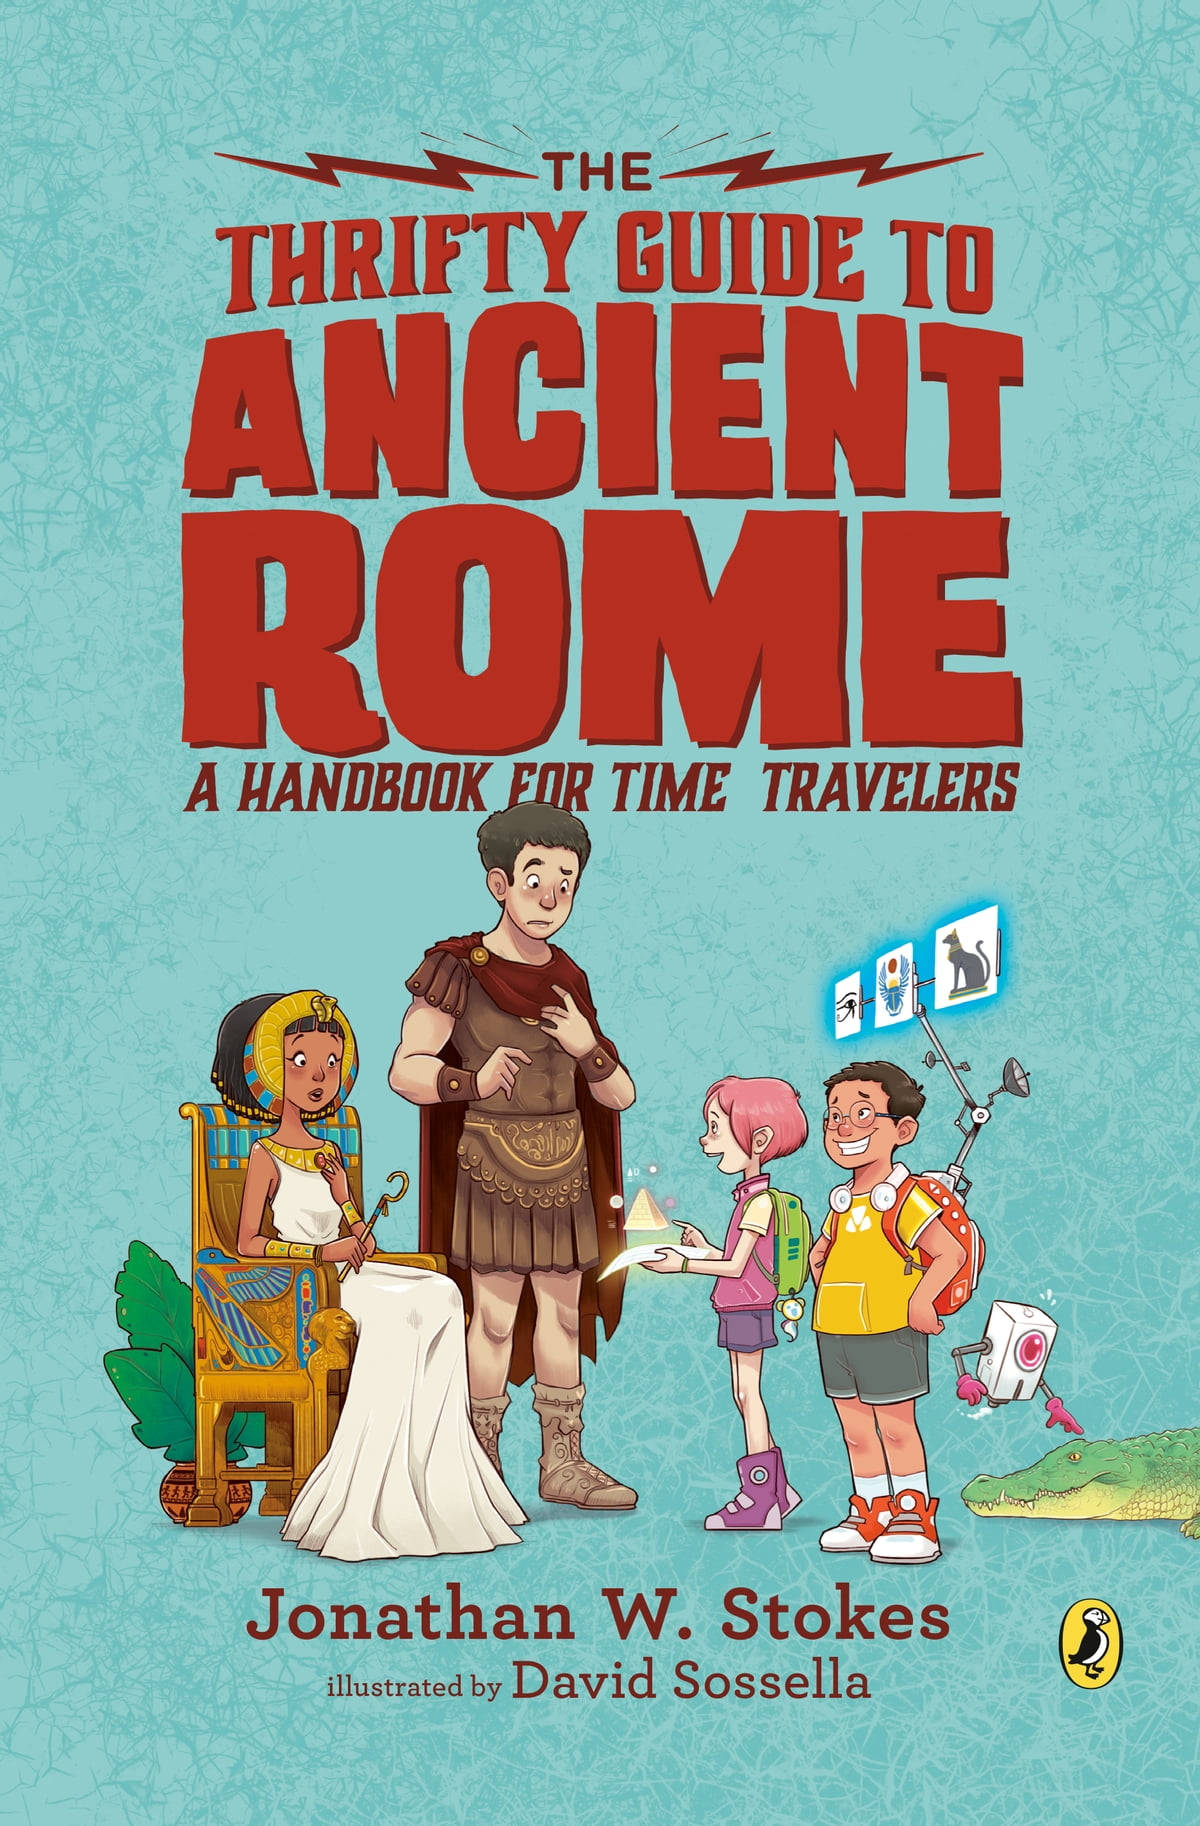 Thrifty Guide To Ancient Rome Background